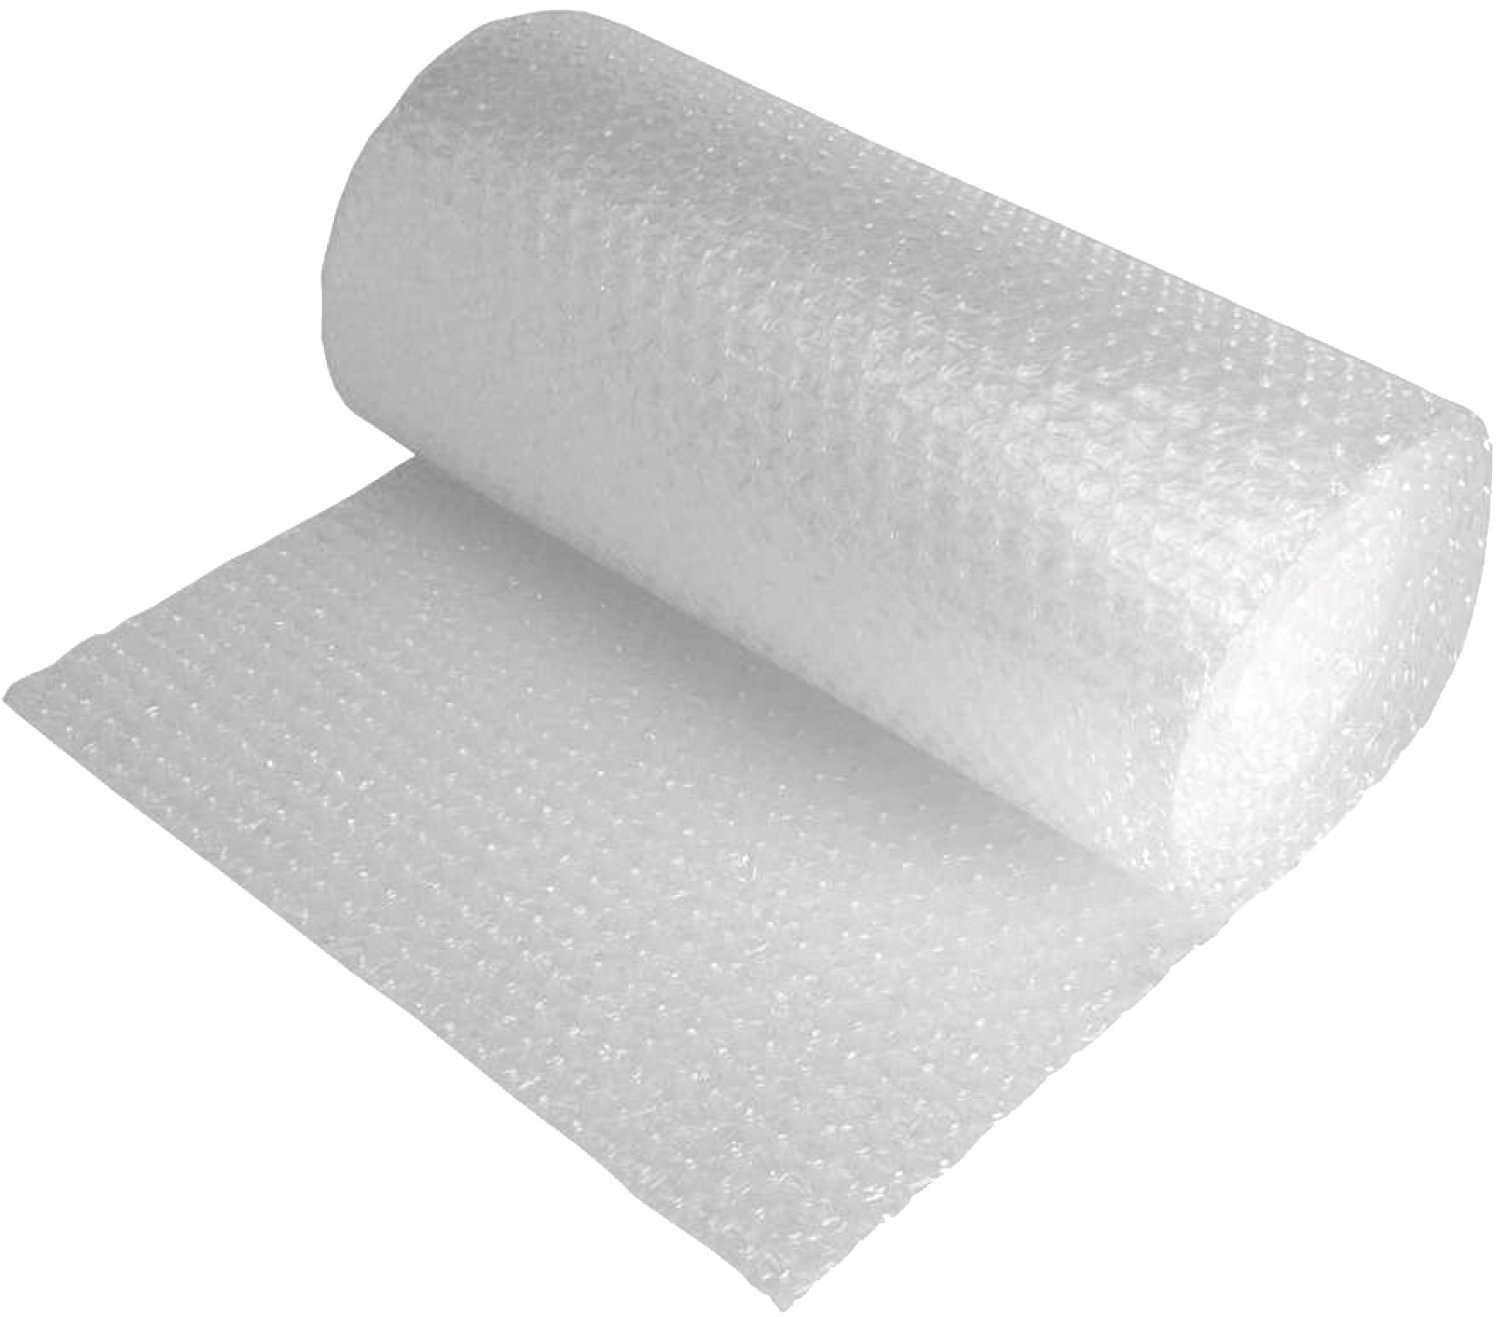 Inditradition Bubble Wrap - Cushioning Packaging Material, 60 GSM ...